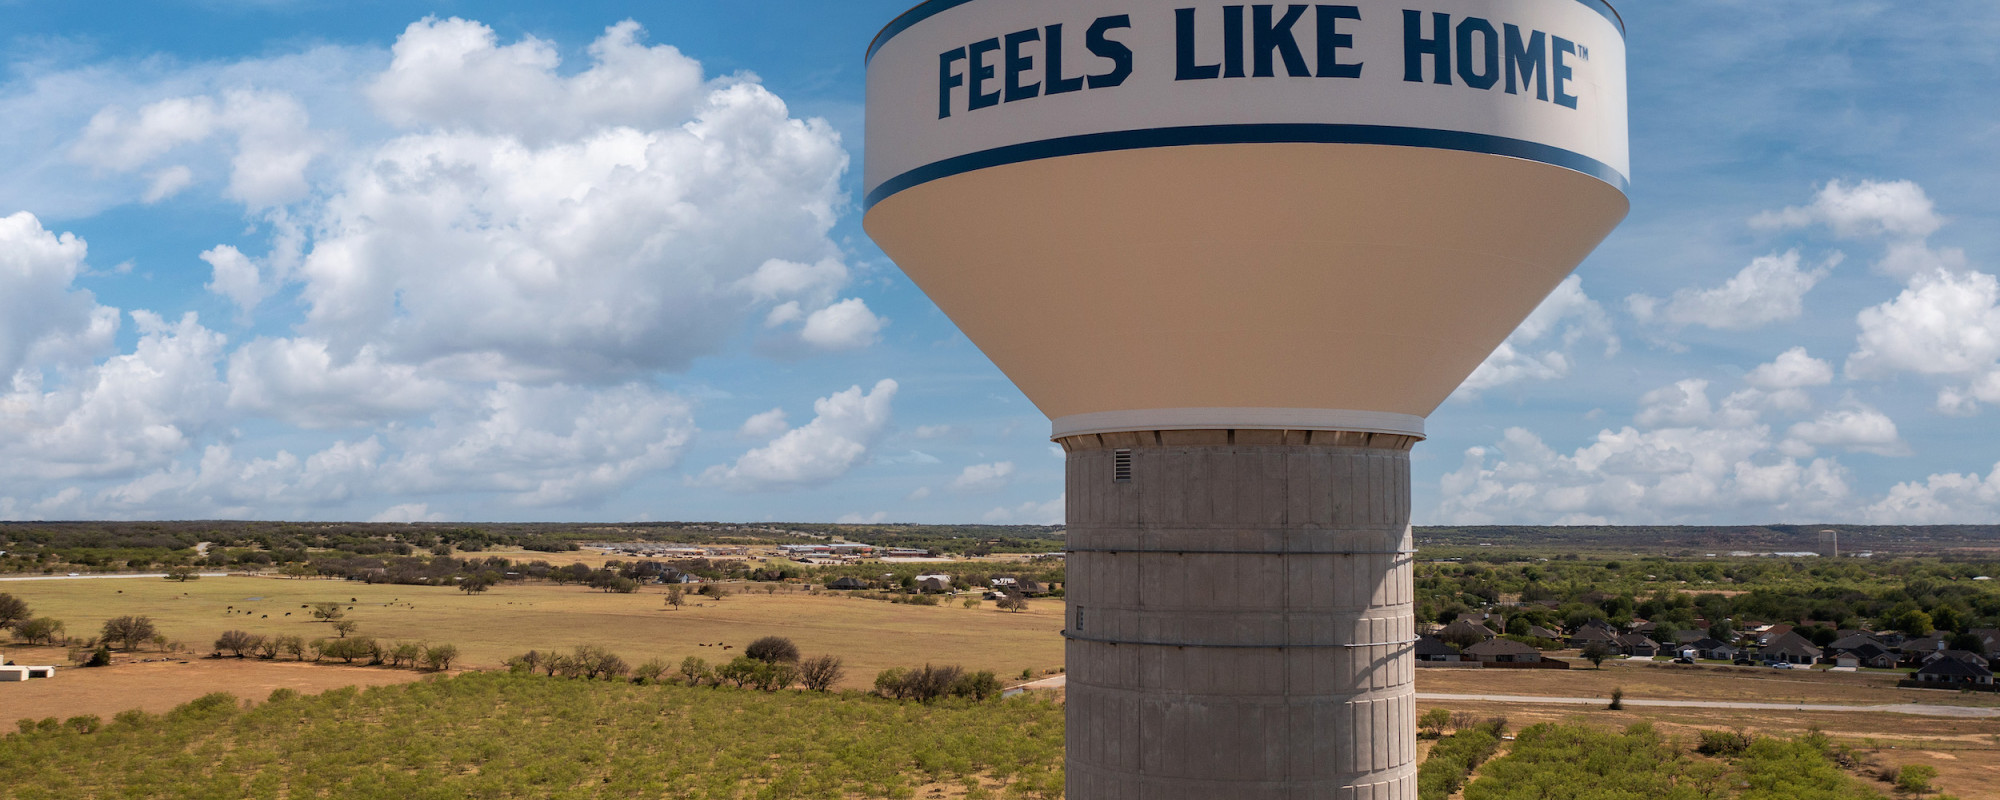 brownwood water tower that say "feels like home" with brownwood in the background